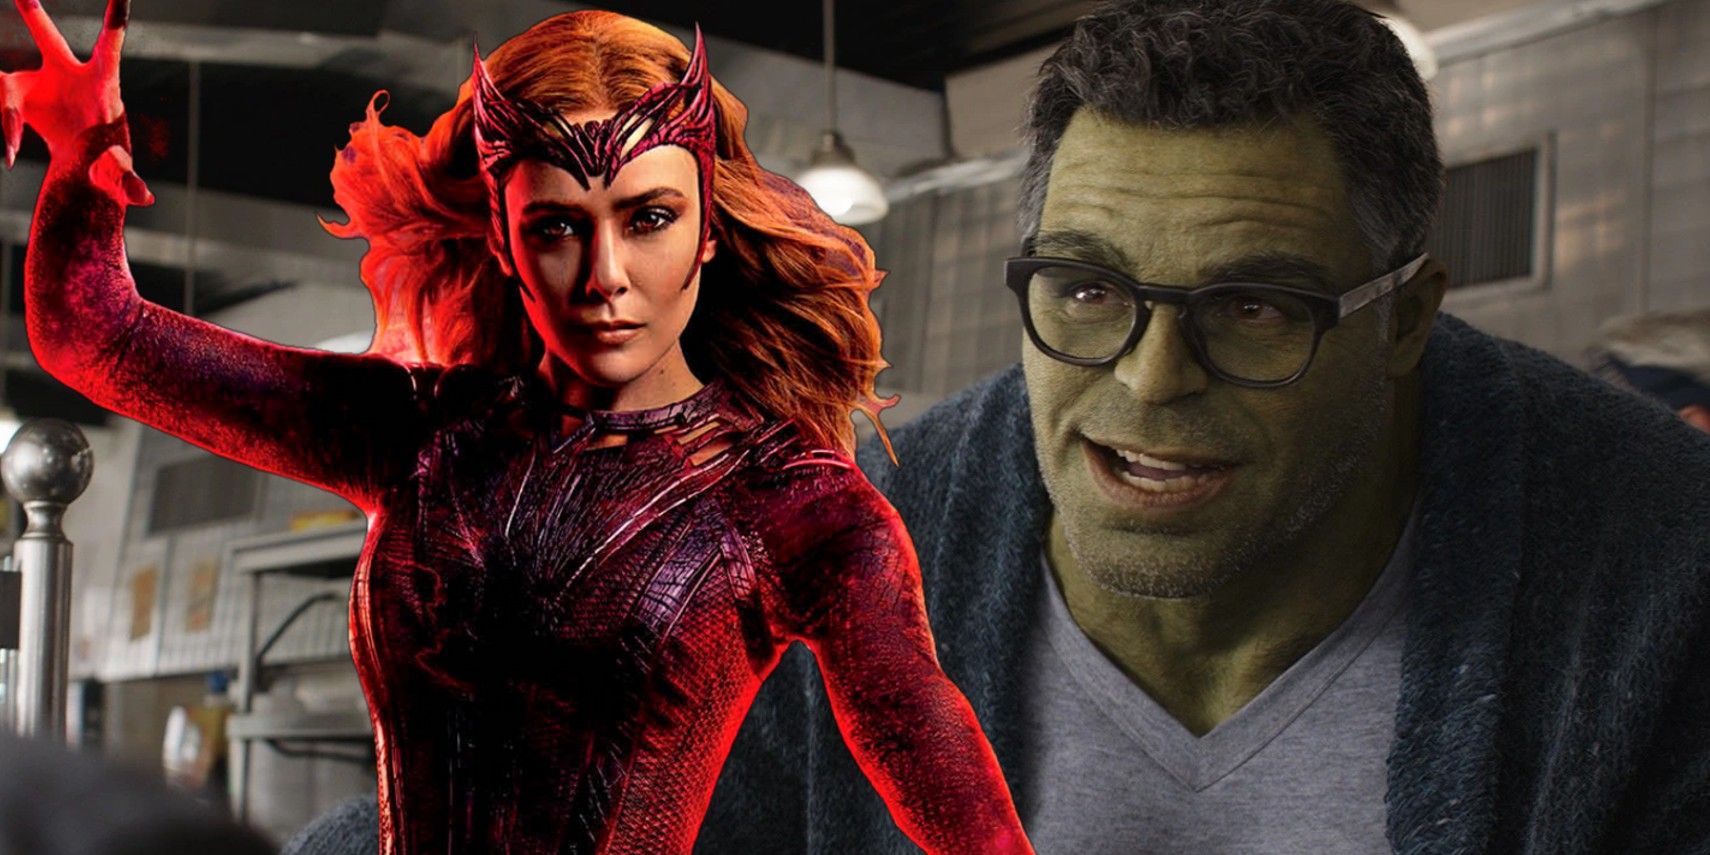 Scarlet Witch and Smart Hulk in the Marvel Cinematic Universe